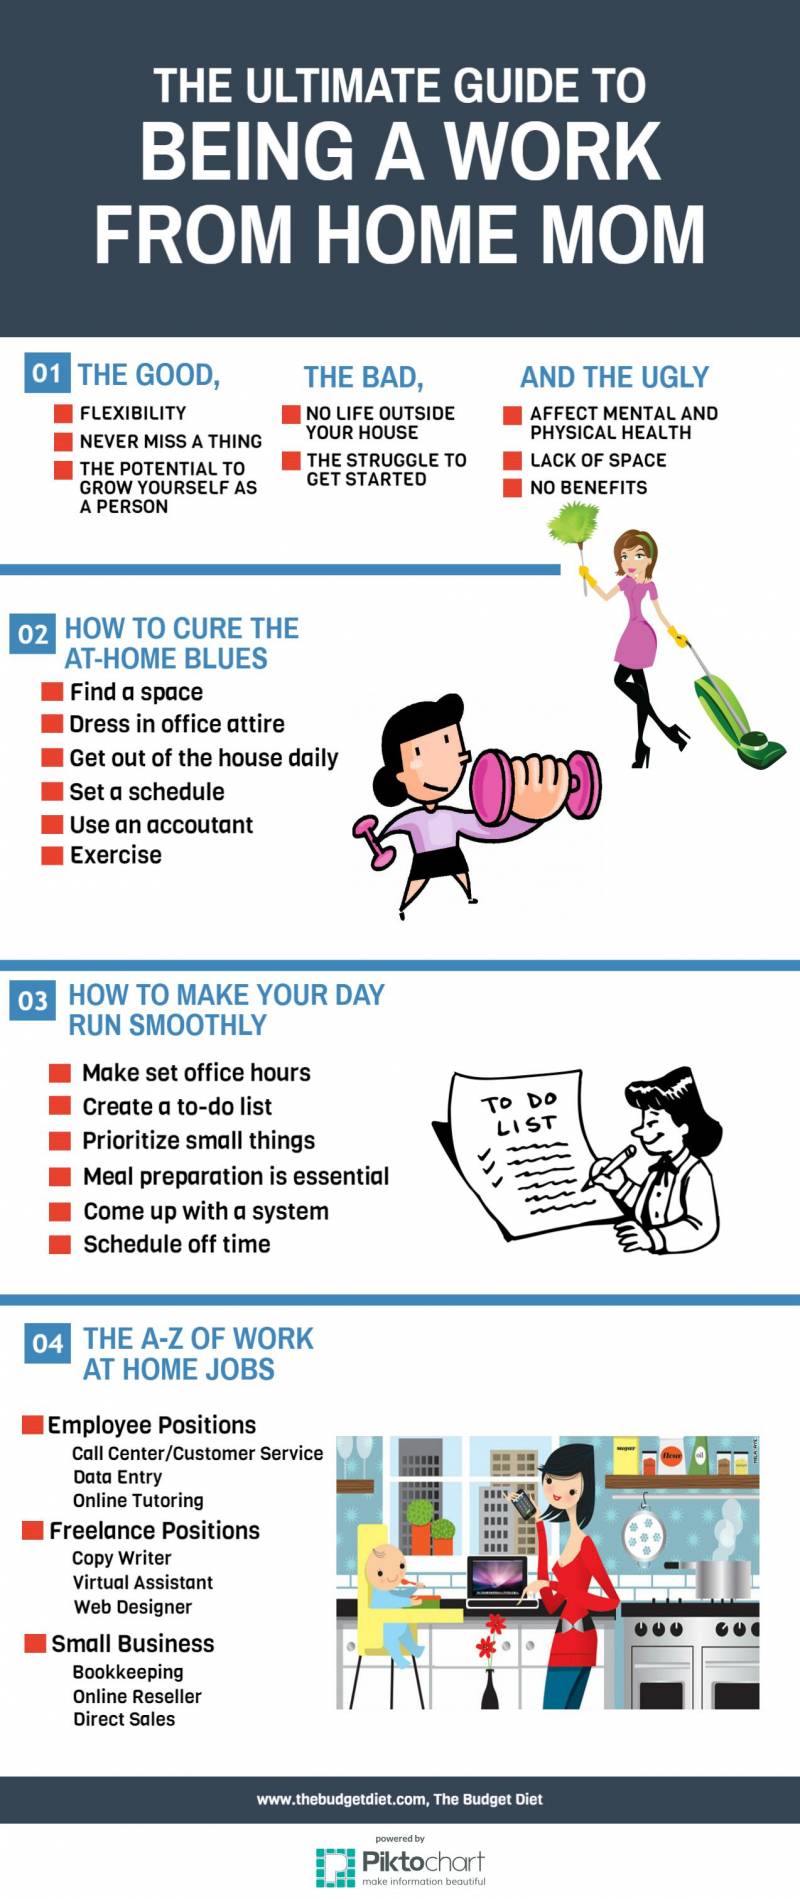 Best Jobs For Moms: 5 Family-Friendly Careers To Consider